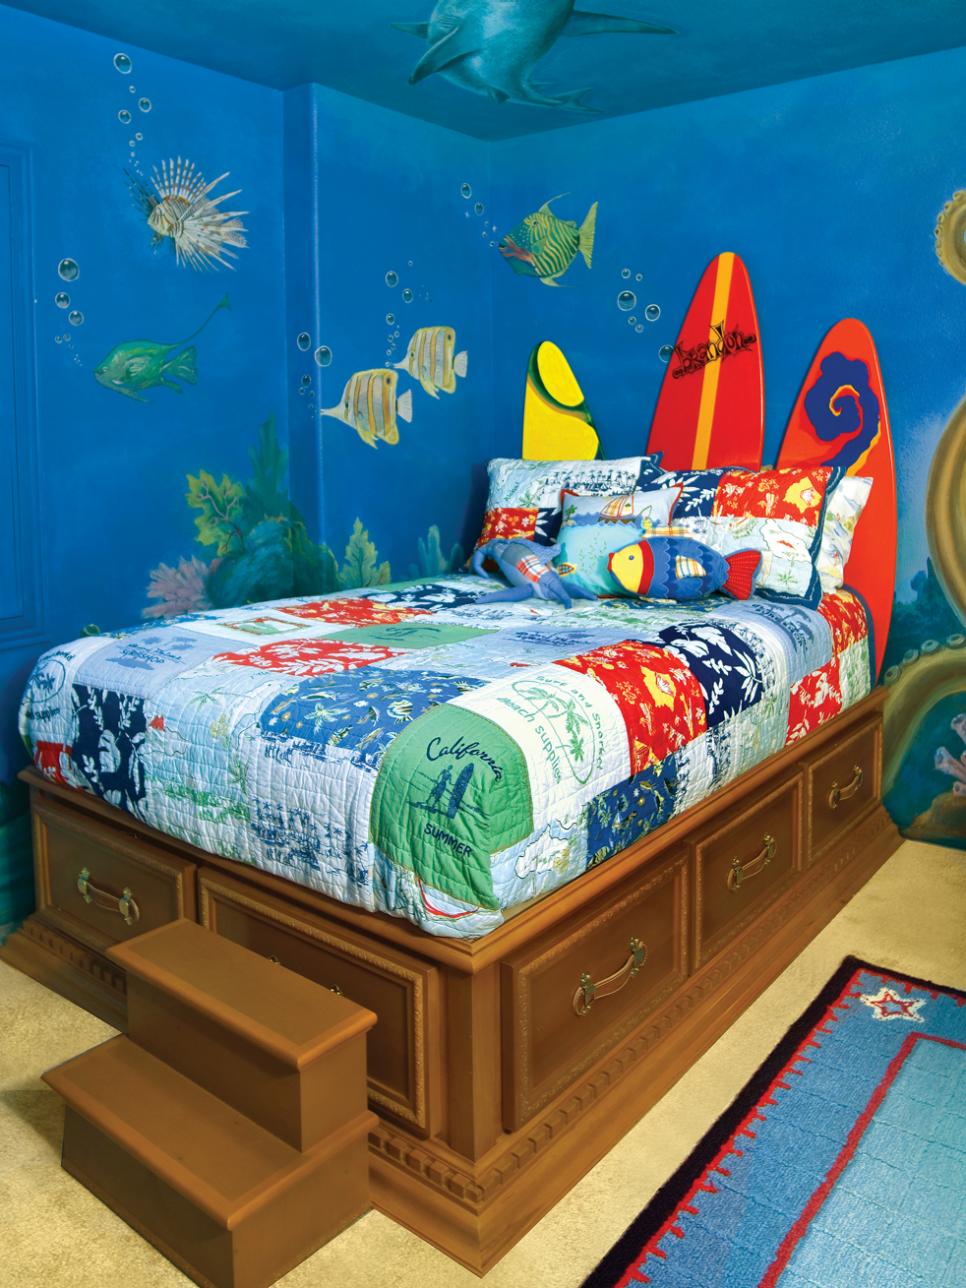 8 Ideas For Kids Bedroom Themes Hgtv and Famous Cool Kids Bedroom Theme Ideas – Top Photo Resource